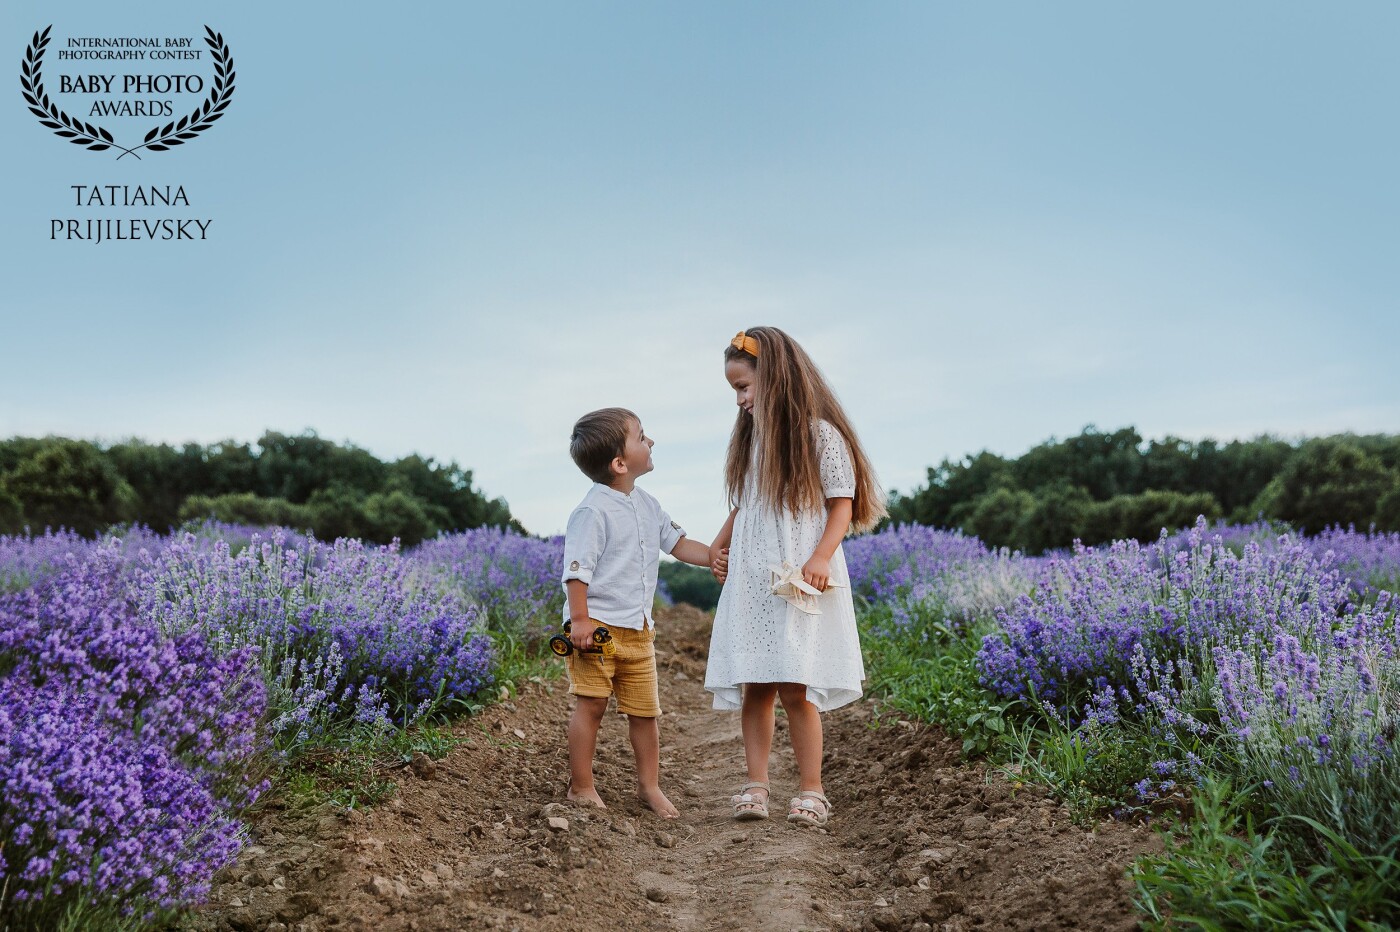 When you take a picture of someone, you are taking a snapshot of their energy. Sister and brother: - How adorable they are!<br />
Looking at this picture, I'm feeling so peaceful. 